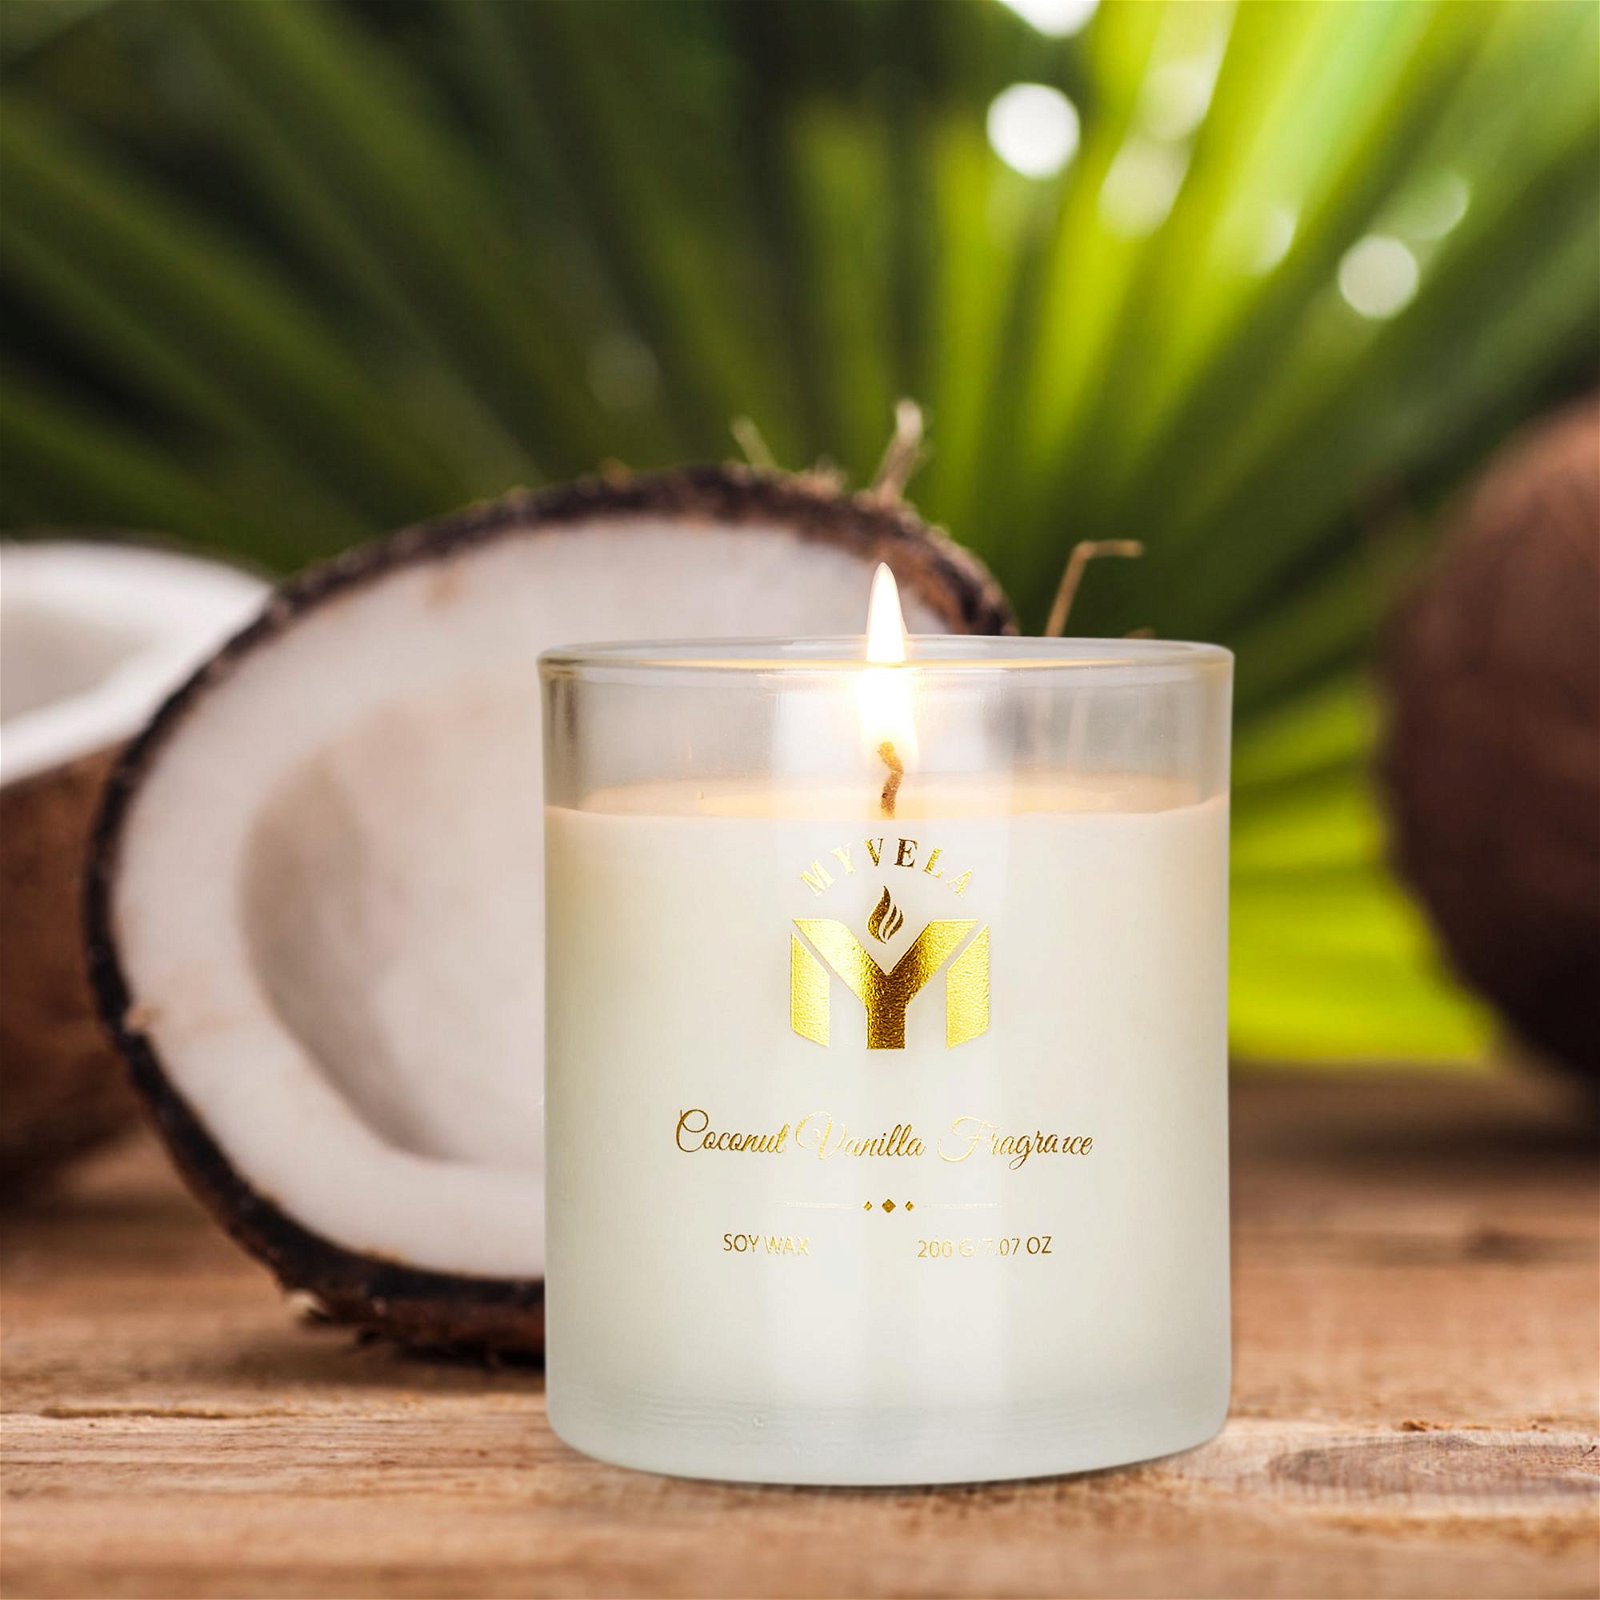 Scented Candle Coconut Vanilla  Fragrance  7.07 Oz Soy Wax 40 Hours Long L 5